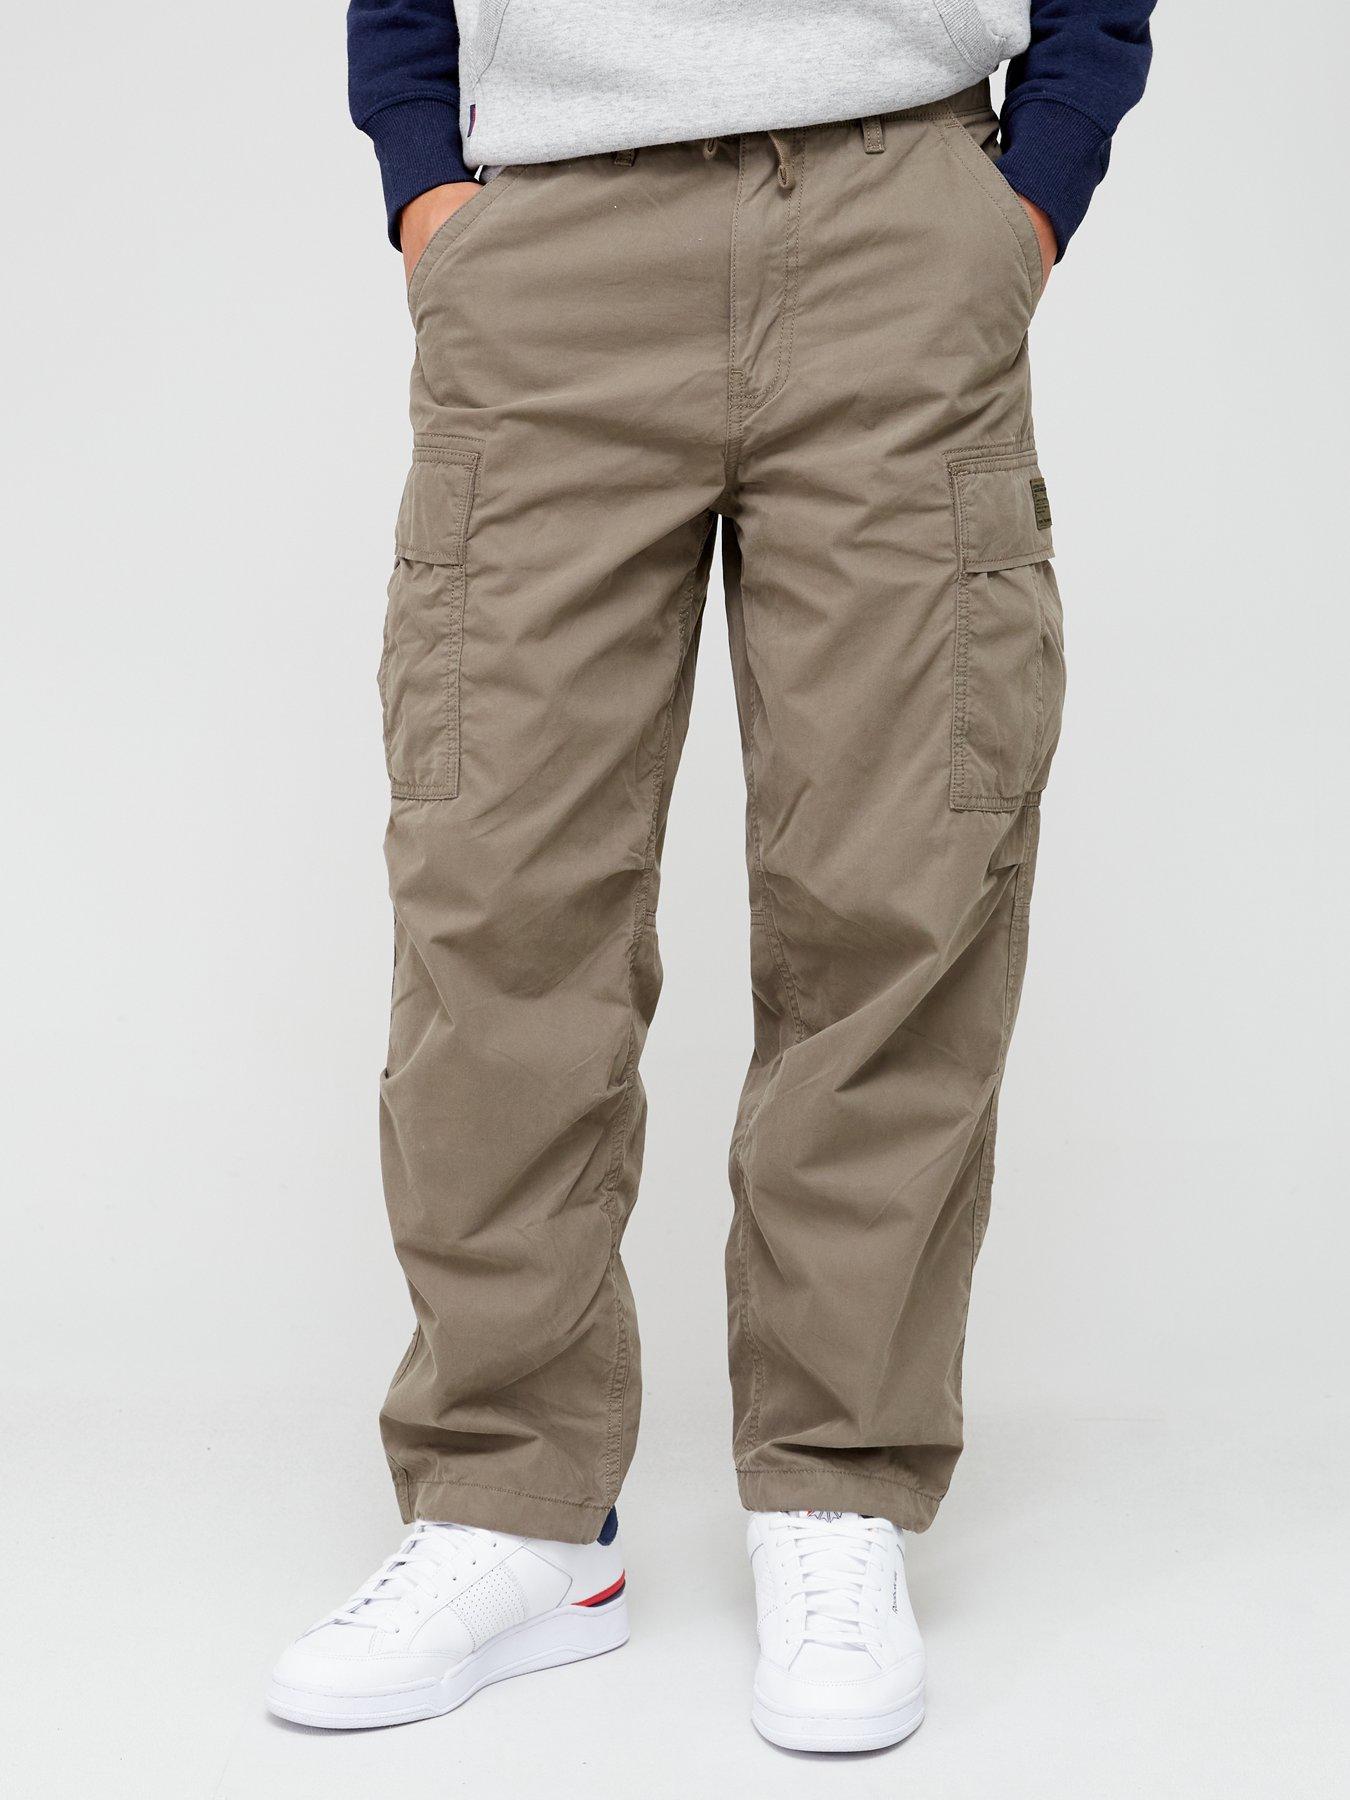 MEN FASHION Trousers Straight Beige discount 79% Columbia Cargo trousers 